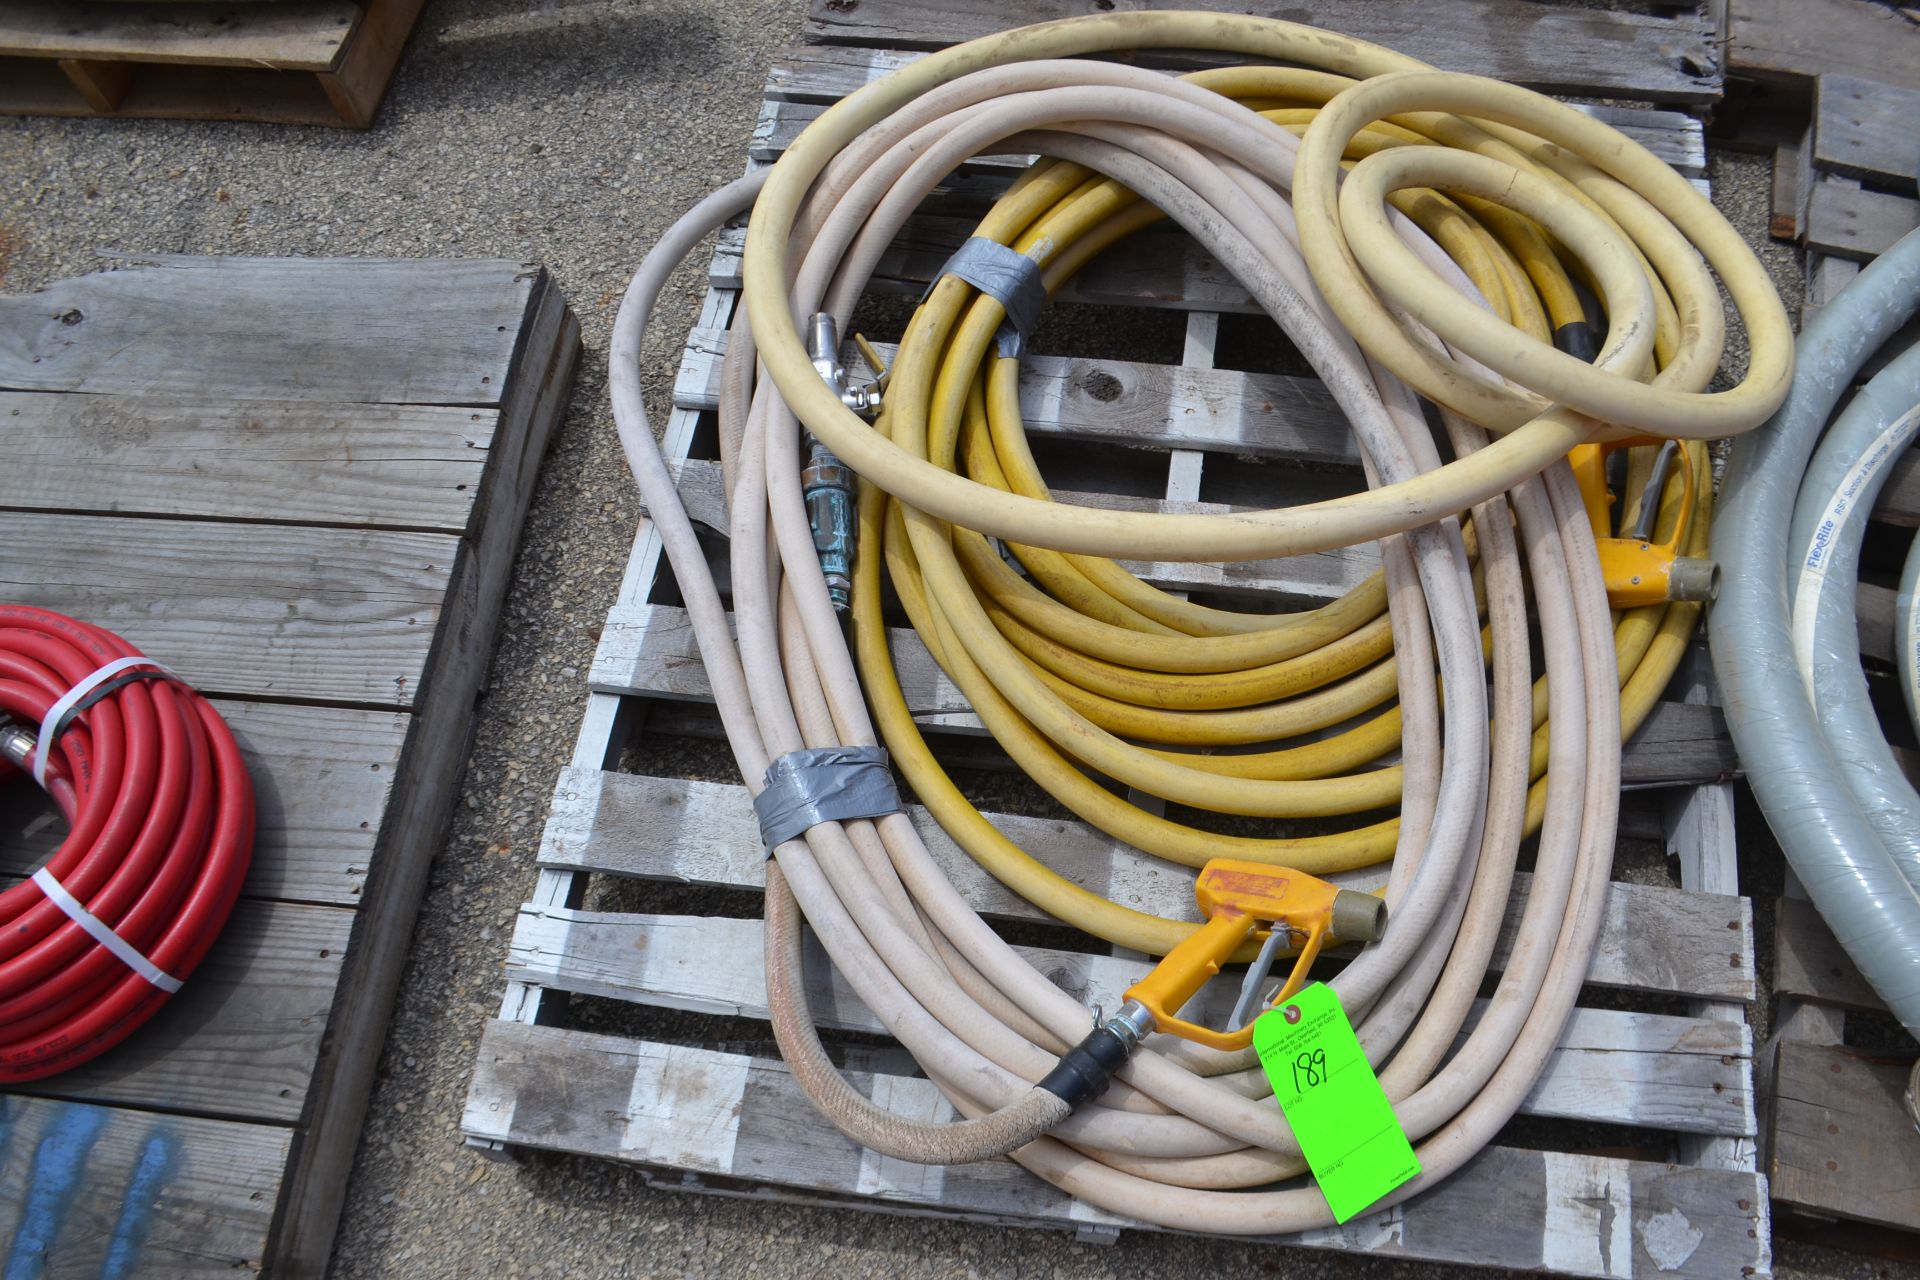 Lot of (2) 1"H Pressure Water Hoses with Spray Nozzles.